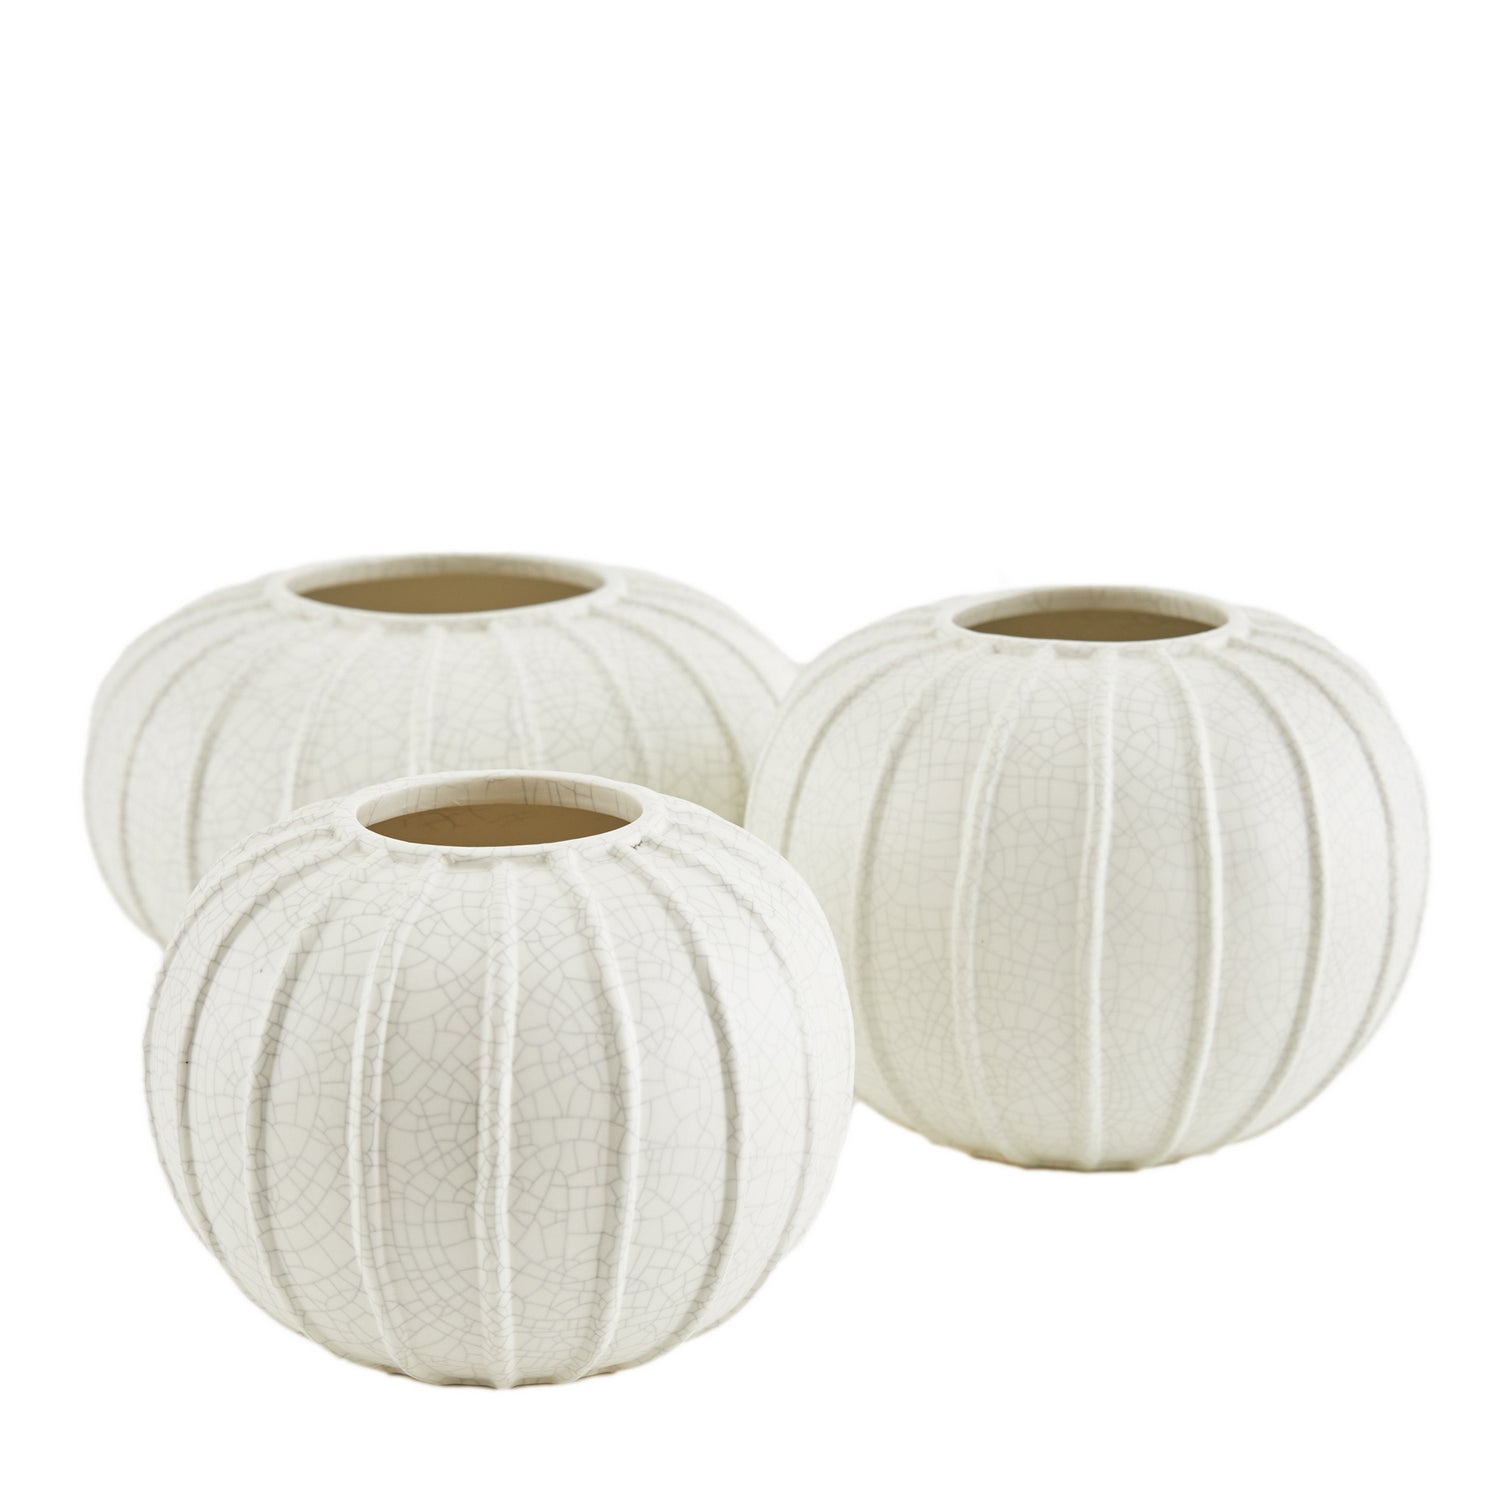 Vases, Set of 3 from the Pompanos collection in Ivory Crackle finish